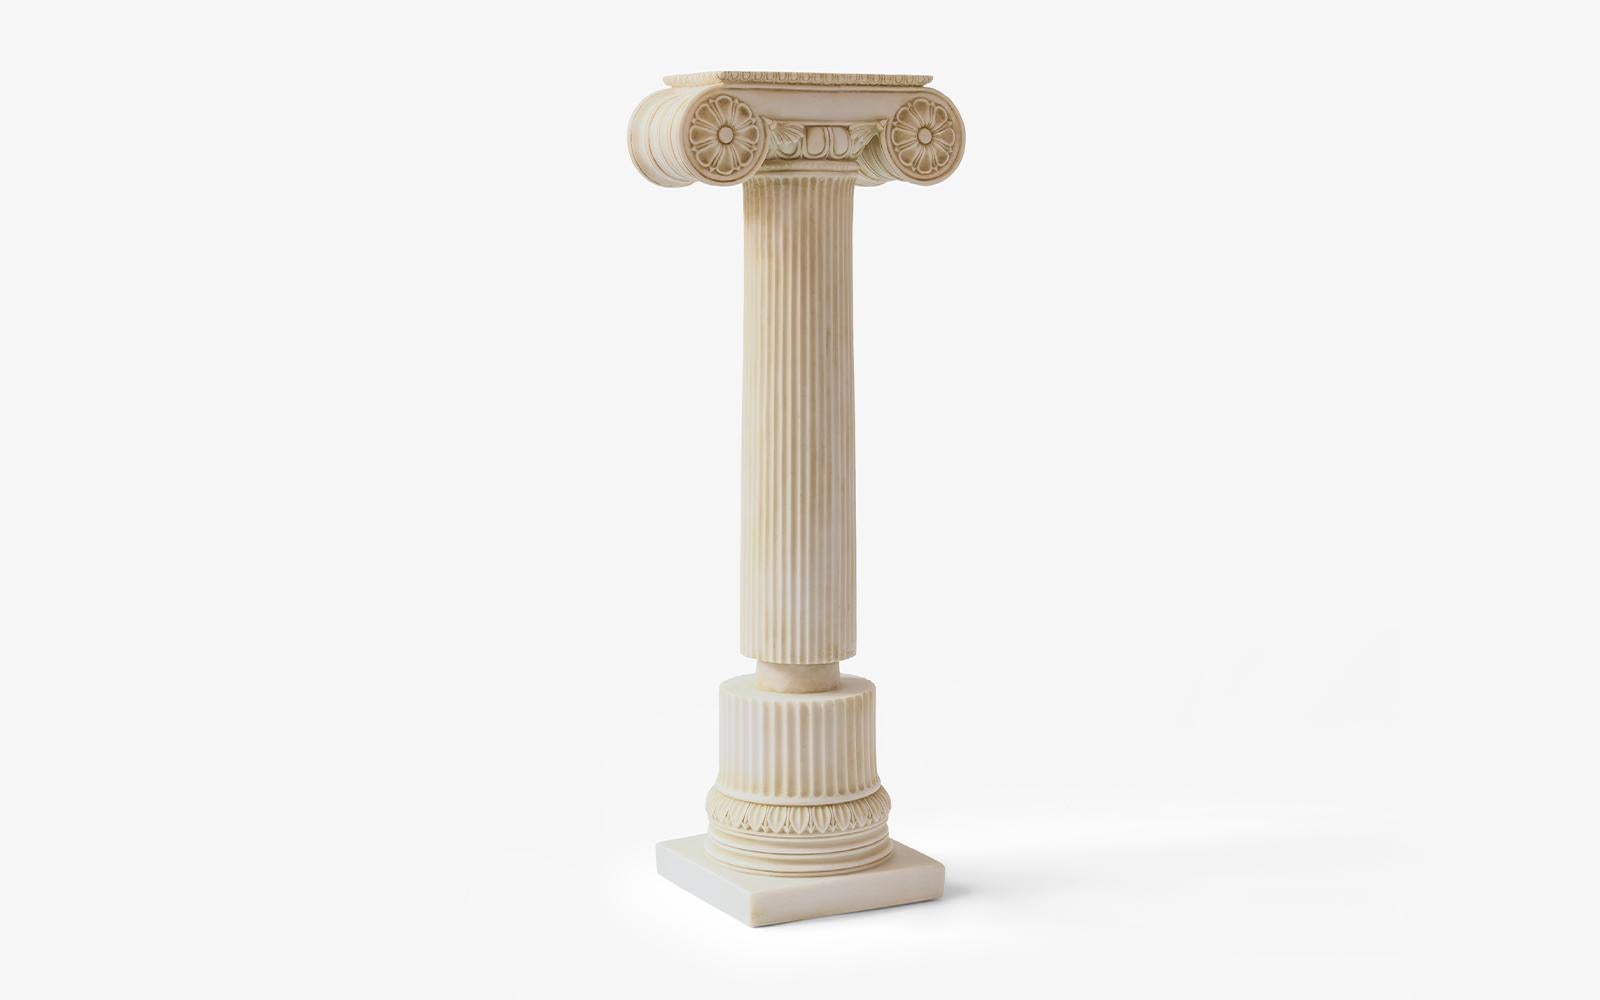 Weight: 7,5 kg
Ionic regular columns, born on the western and southern coasts of Anatolia, have a thin, long and elegant form.

-Produced from pressed marble powder.
-Produced from the original molds of the works from the museum.
-Can be used